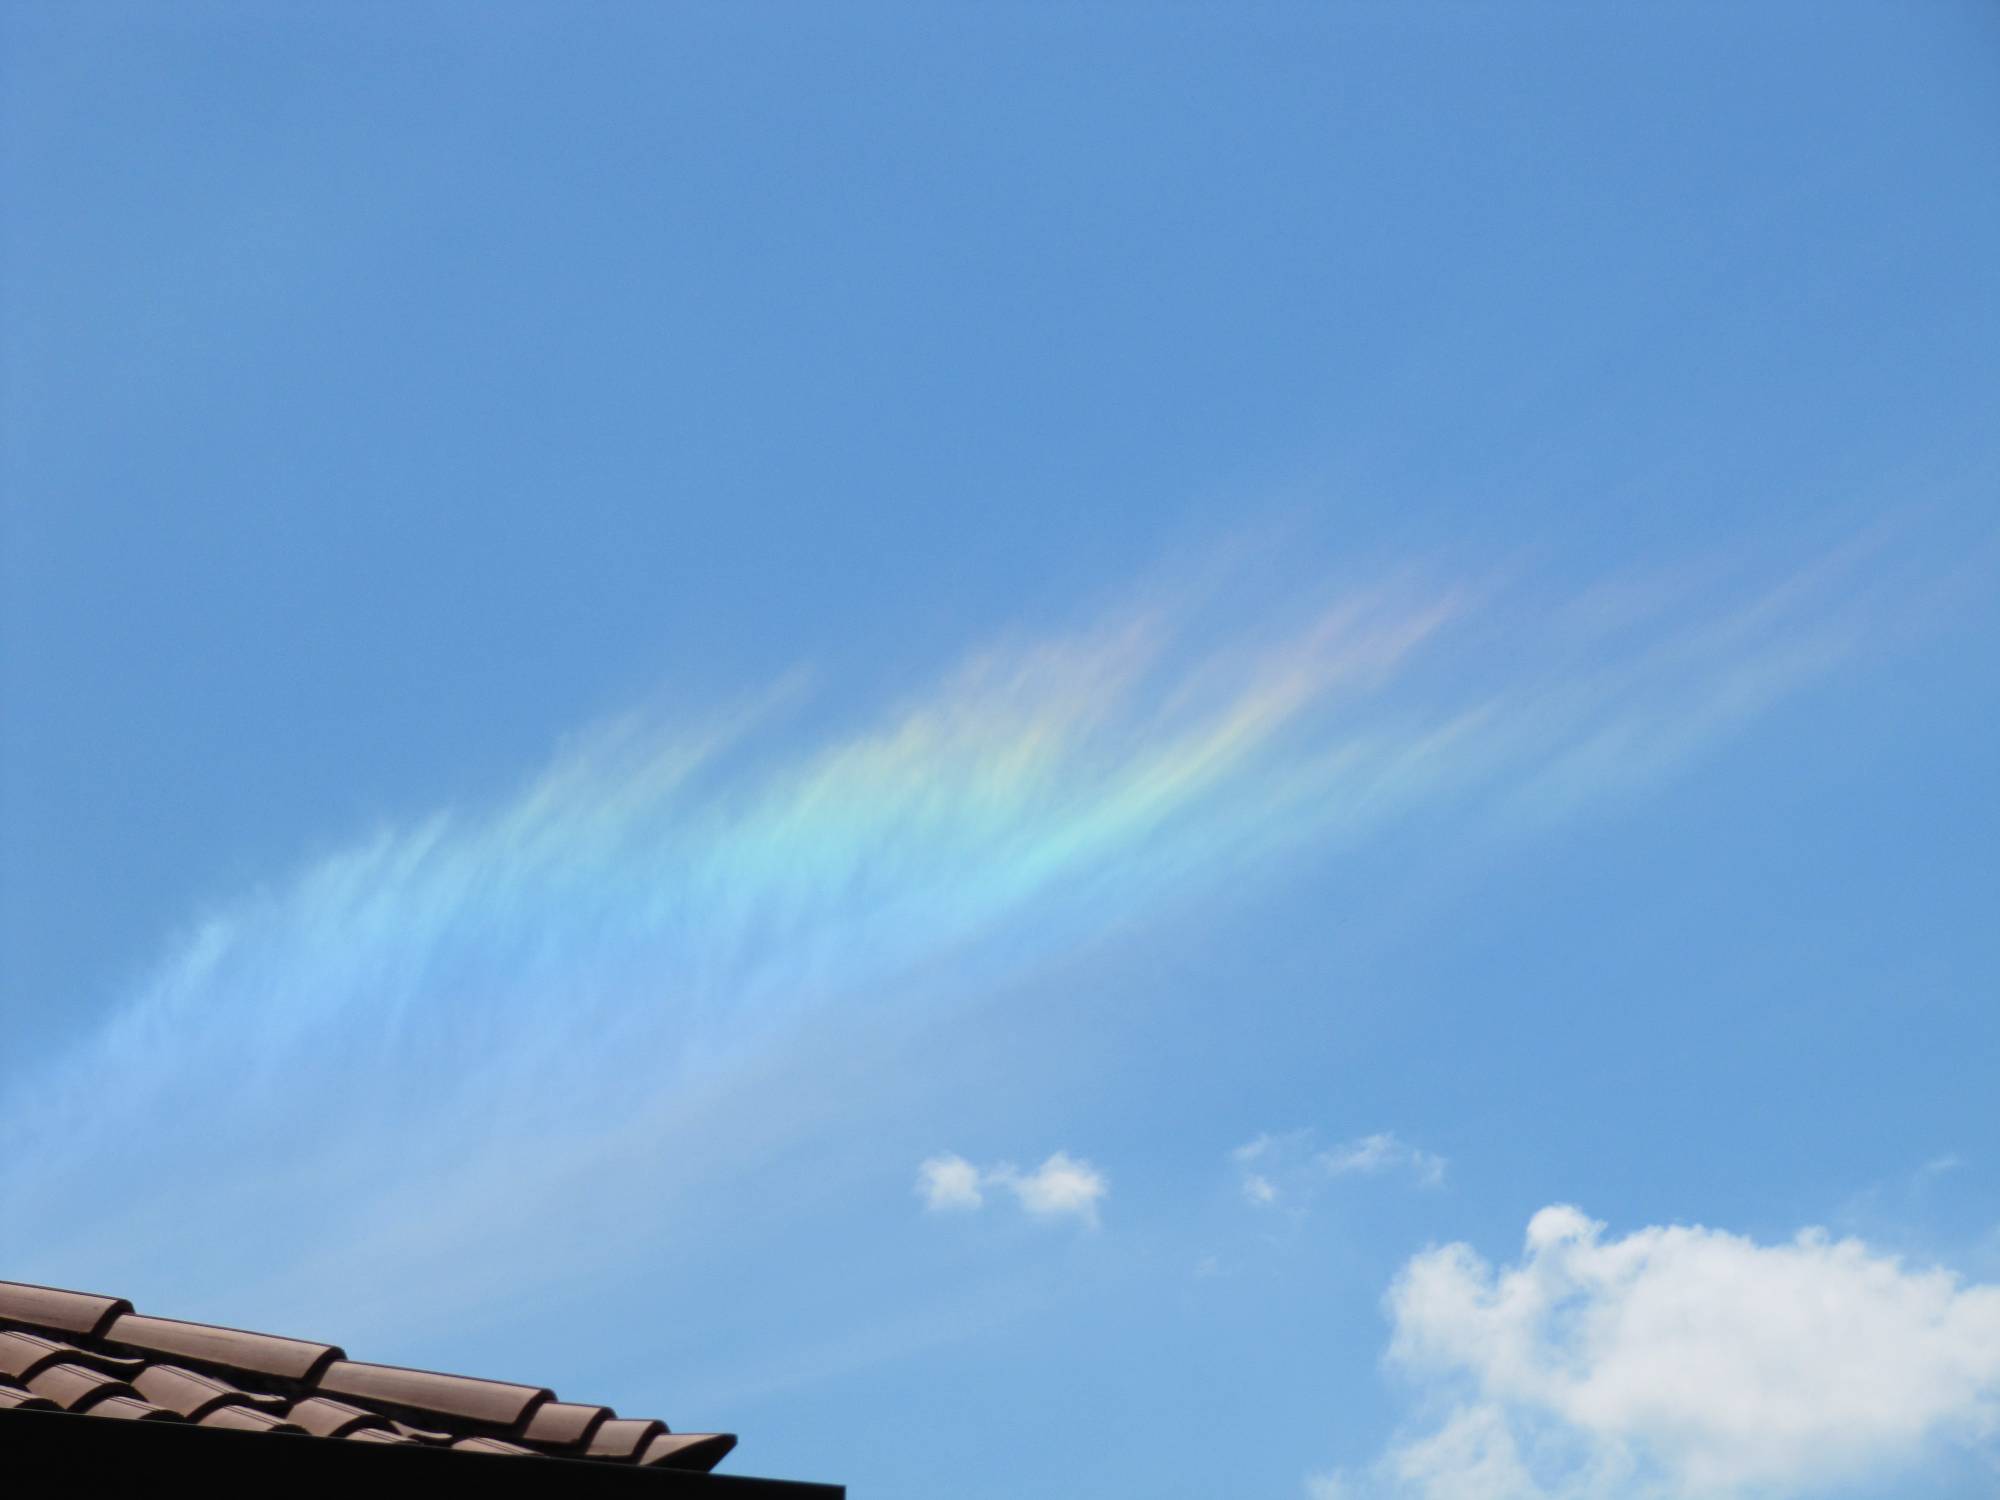 Circumhorizon arc over Rivignano: 85 KB; click on the image to enlarge to 2000x1500 pixels